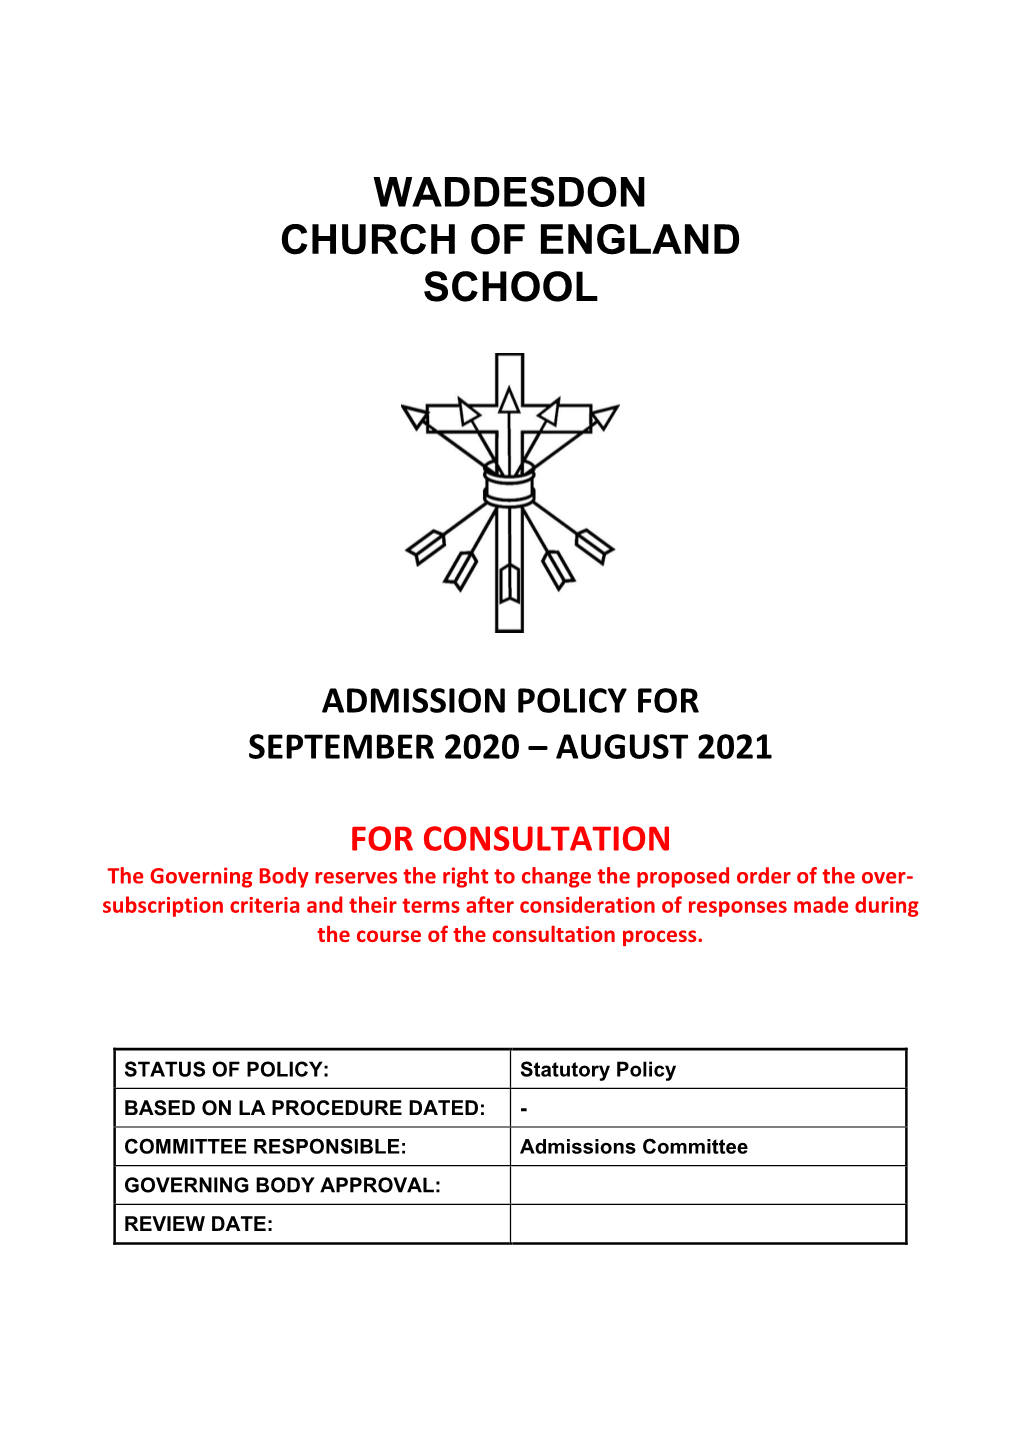 Admission Policy for September 2020 – August 2021